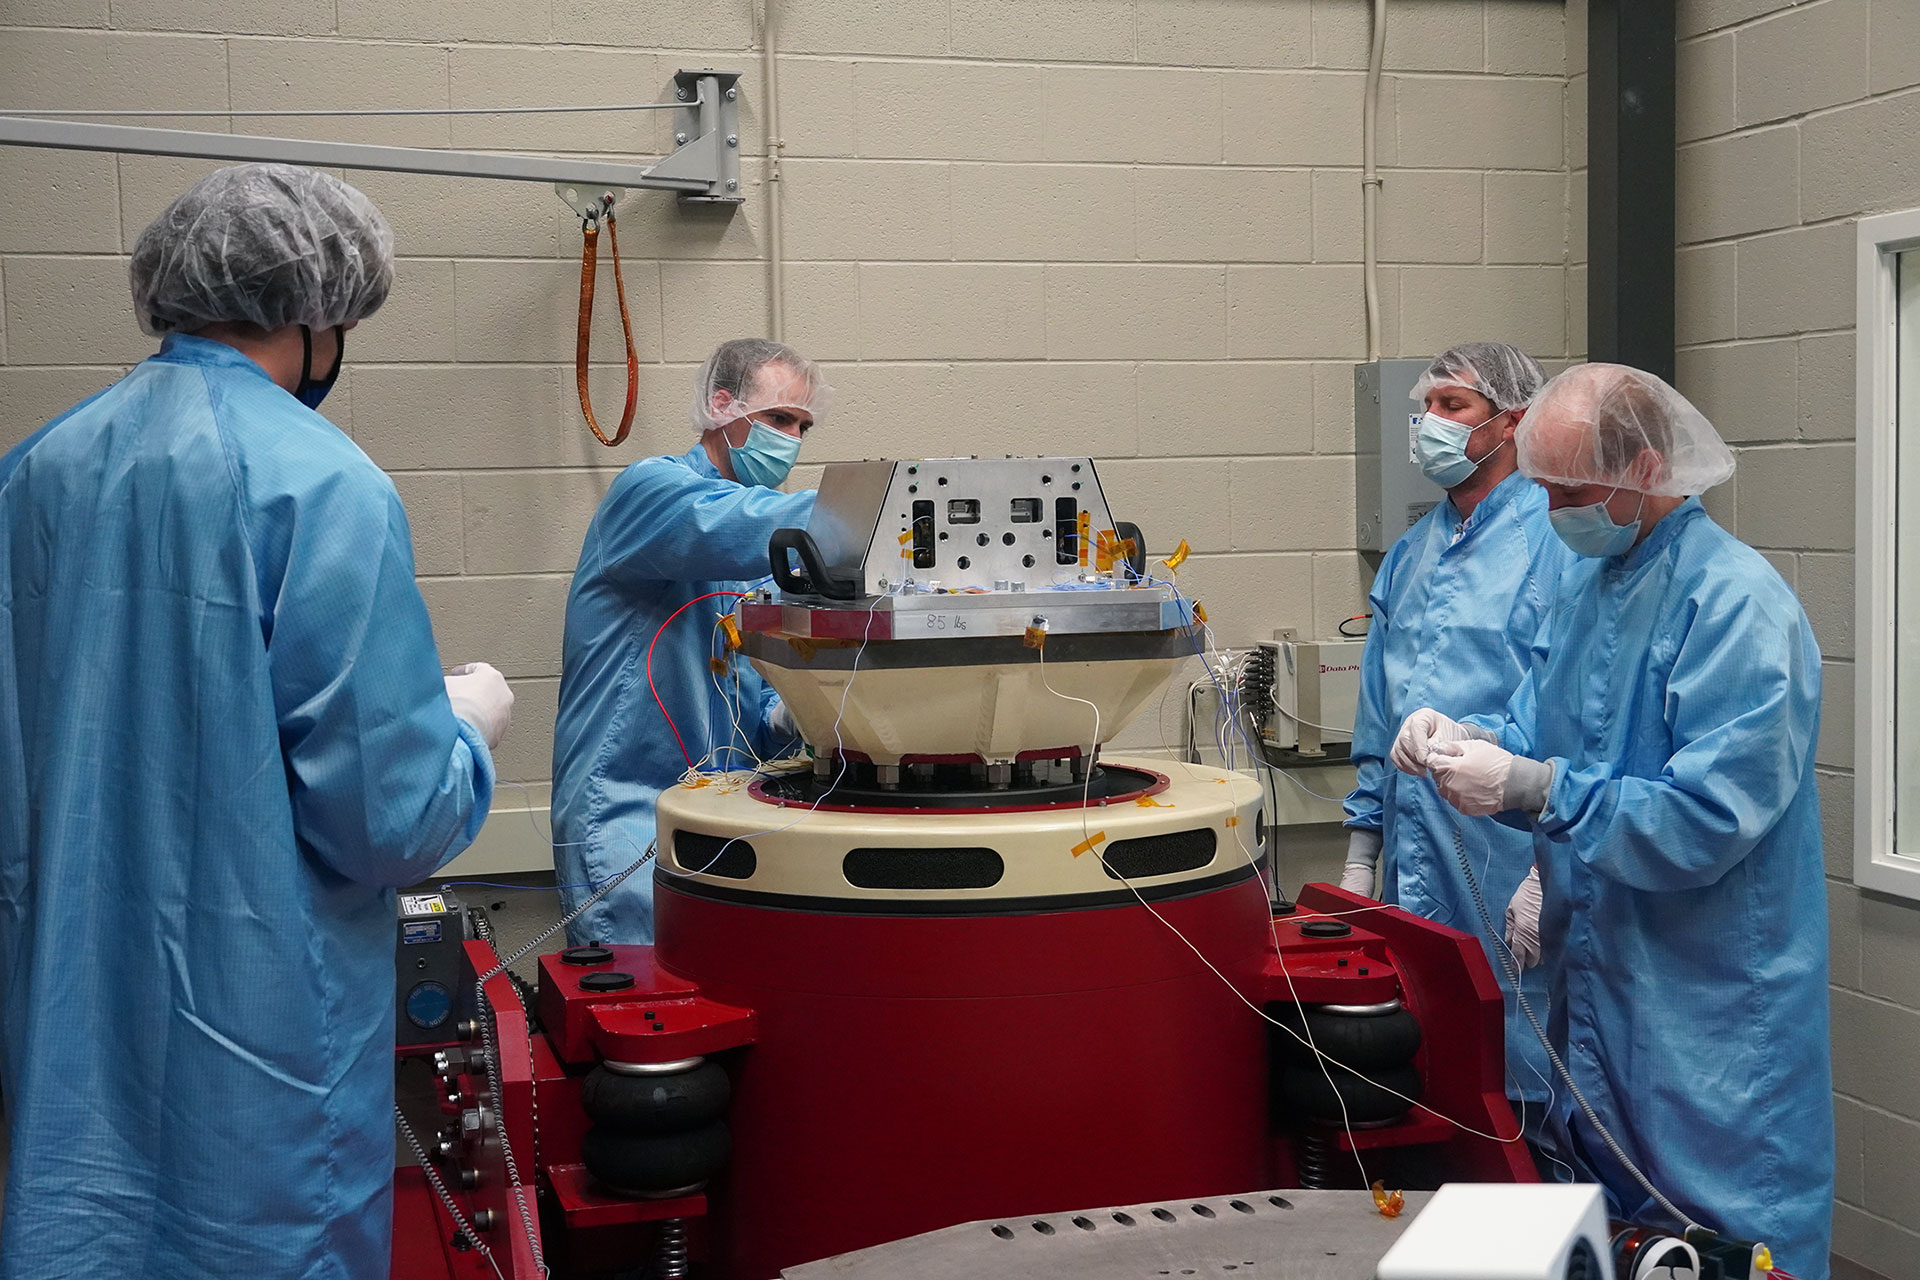 Three researchers dressed in gowns, masks, and hairnets assemble device in lab.